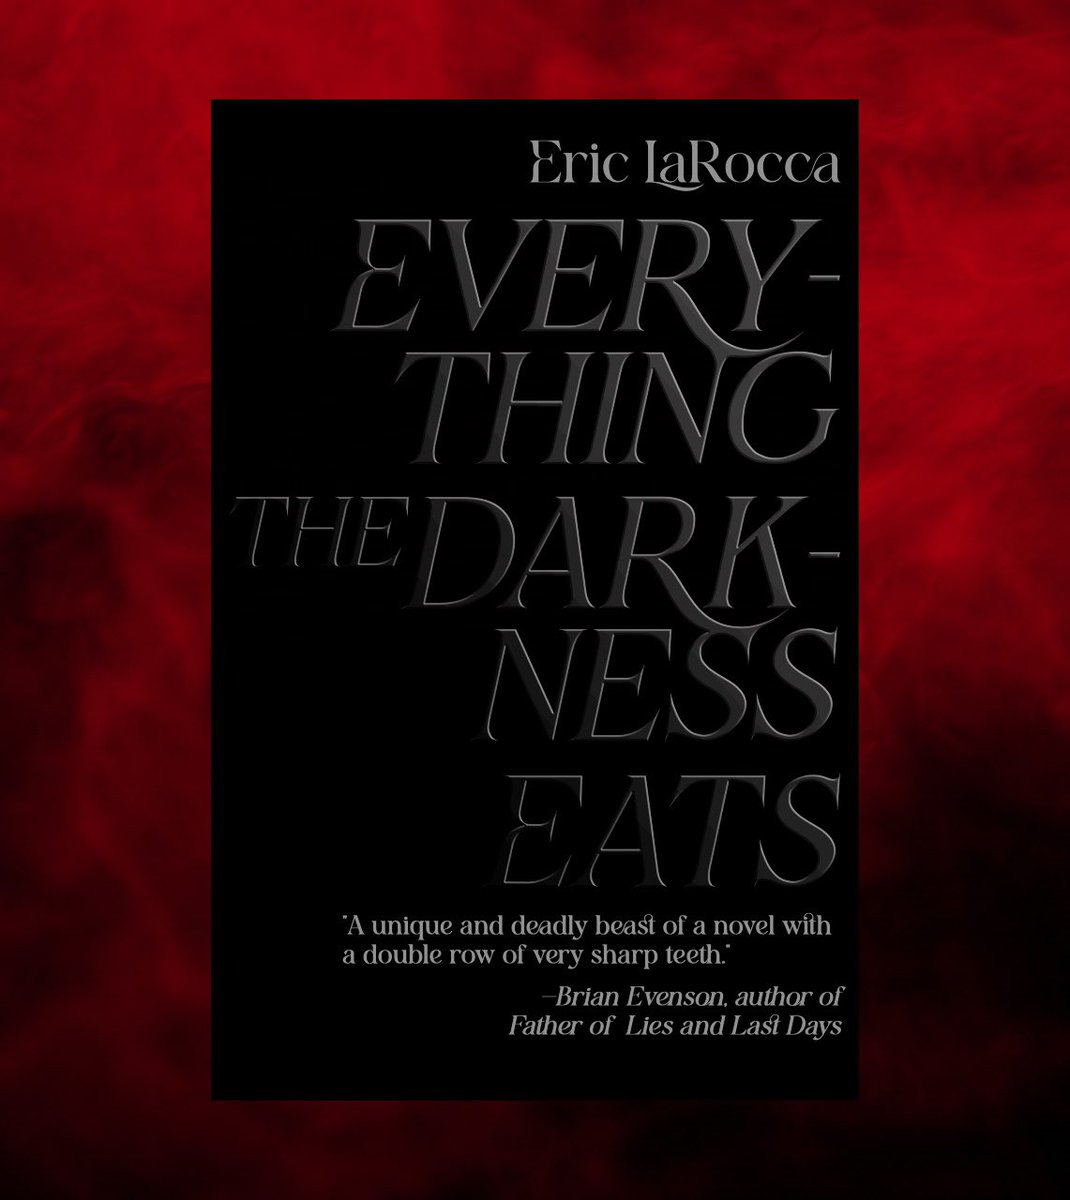 Okay, friends: We’ve been holding off on this until we get closer to release date… But we have digital copies of my upcoming novel to share with reviewers, booksellers, authors, etc. who missed out on NetGalley! If you’re interested, please send an email: ericlarocca.com/contact